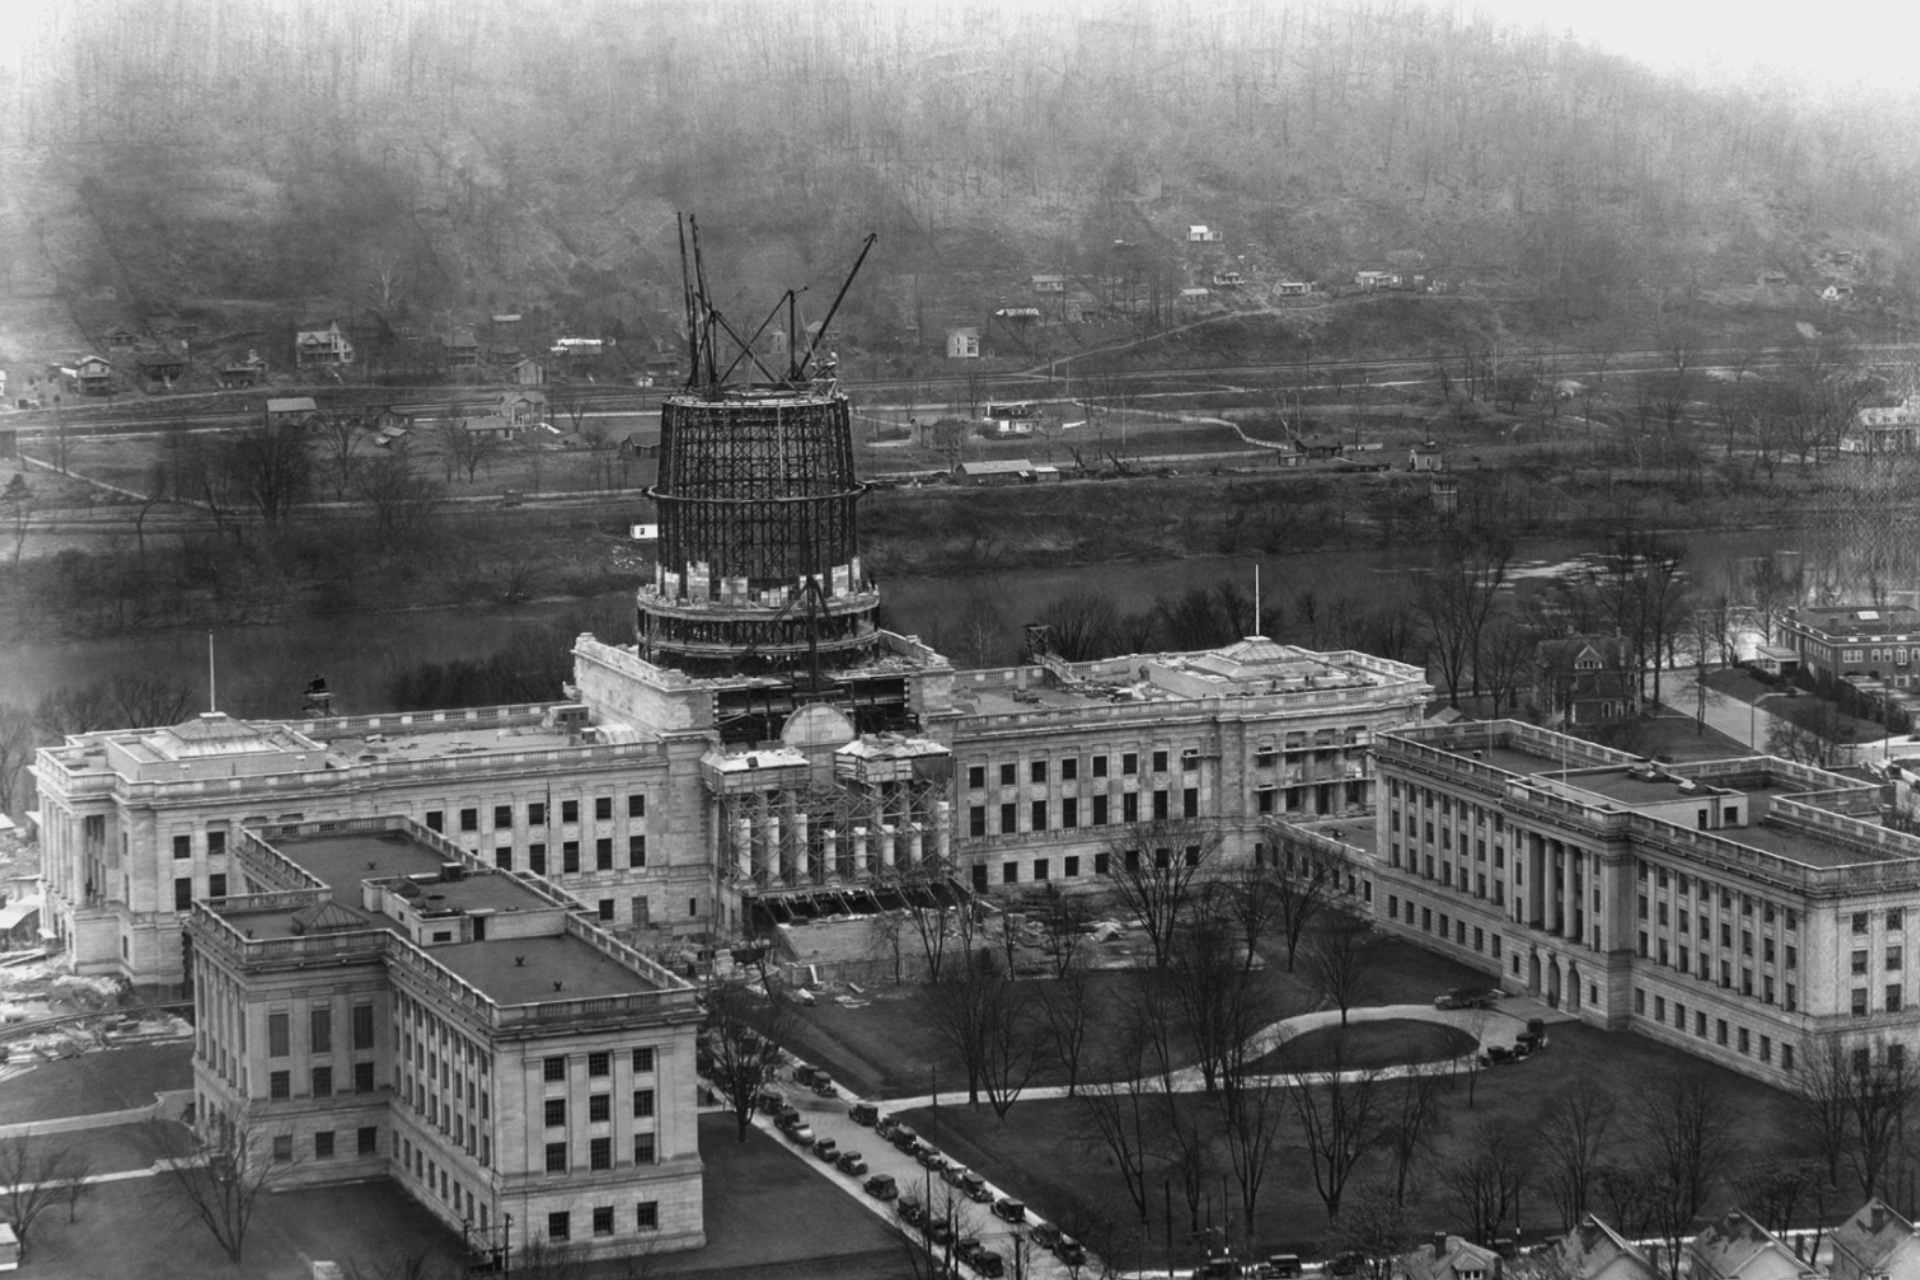 The West Virginia state capitol under construction.